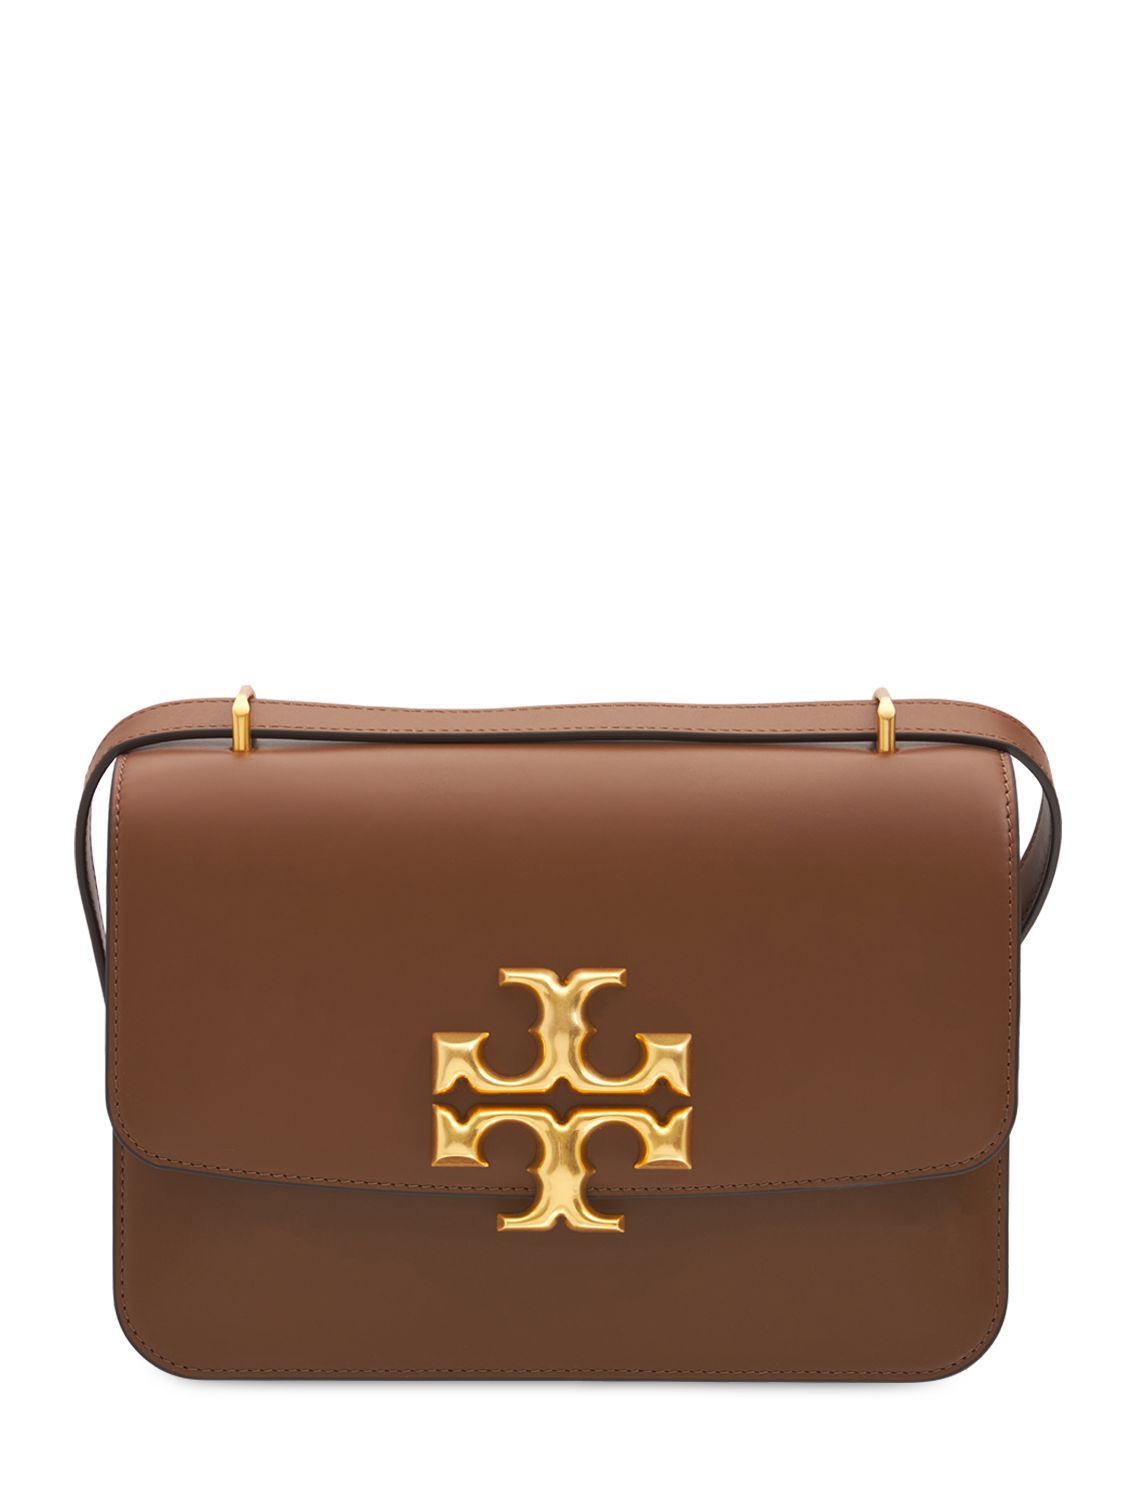 Tory Burch Eleanor Small Leather Shoulder Bag In Brown